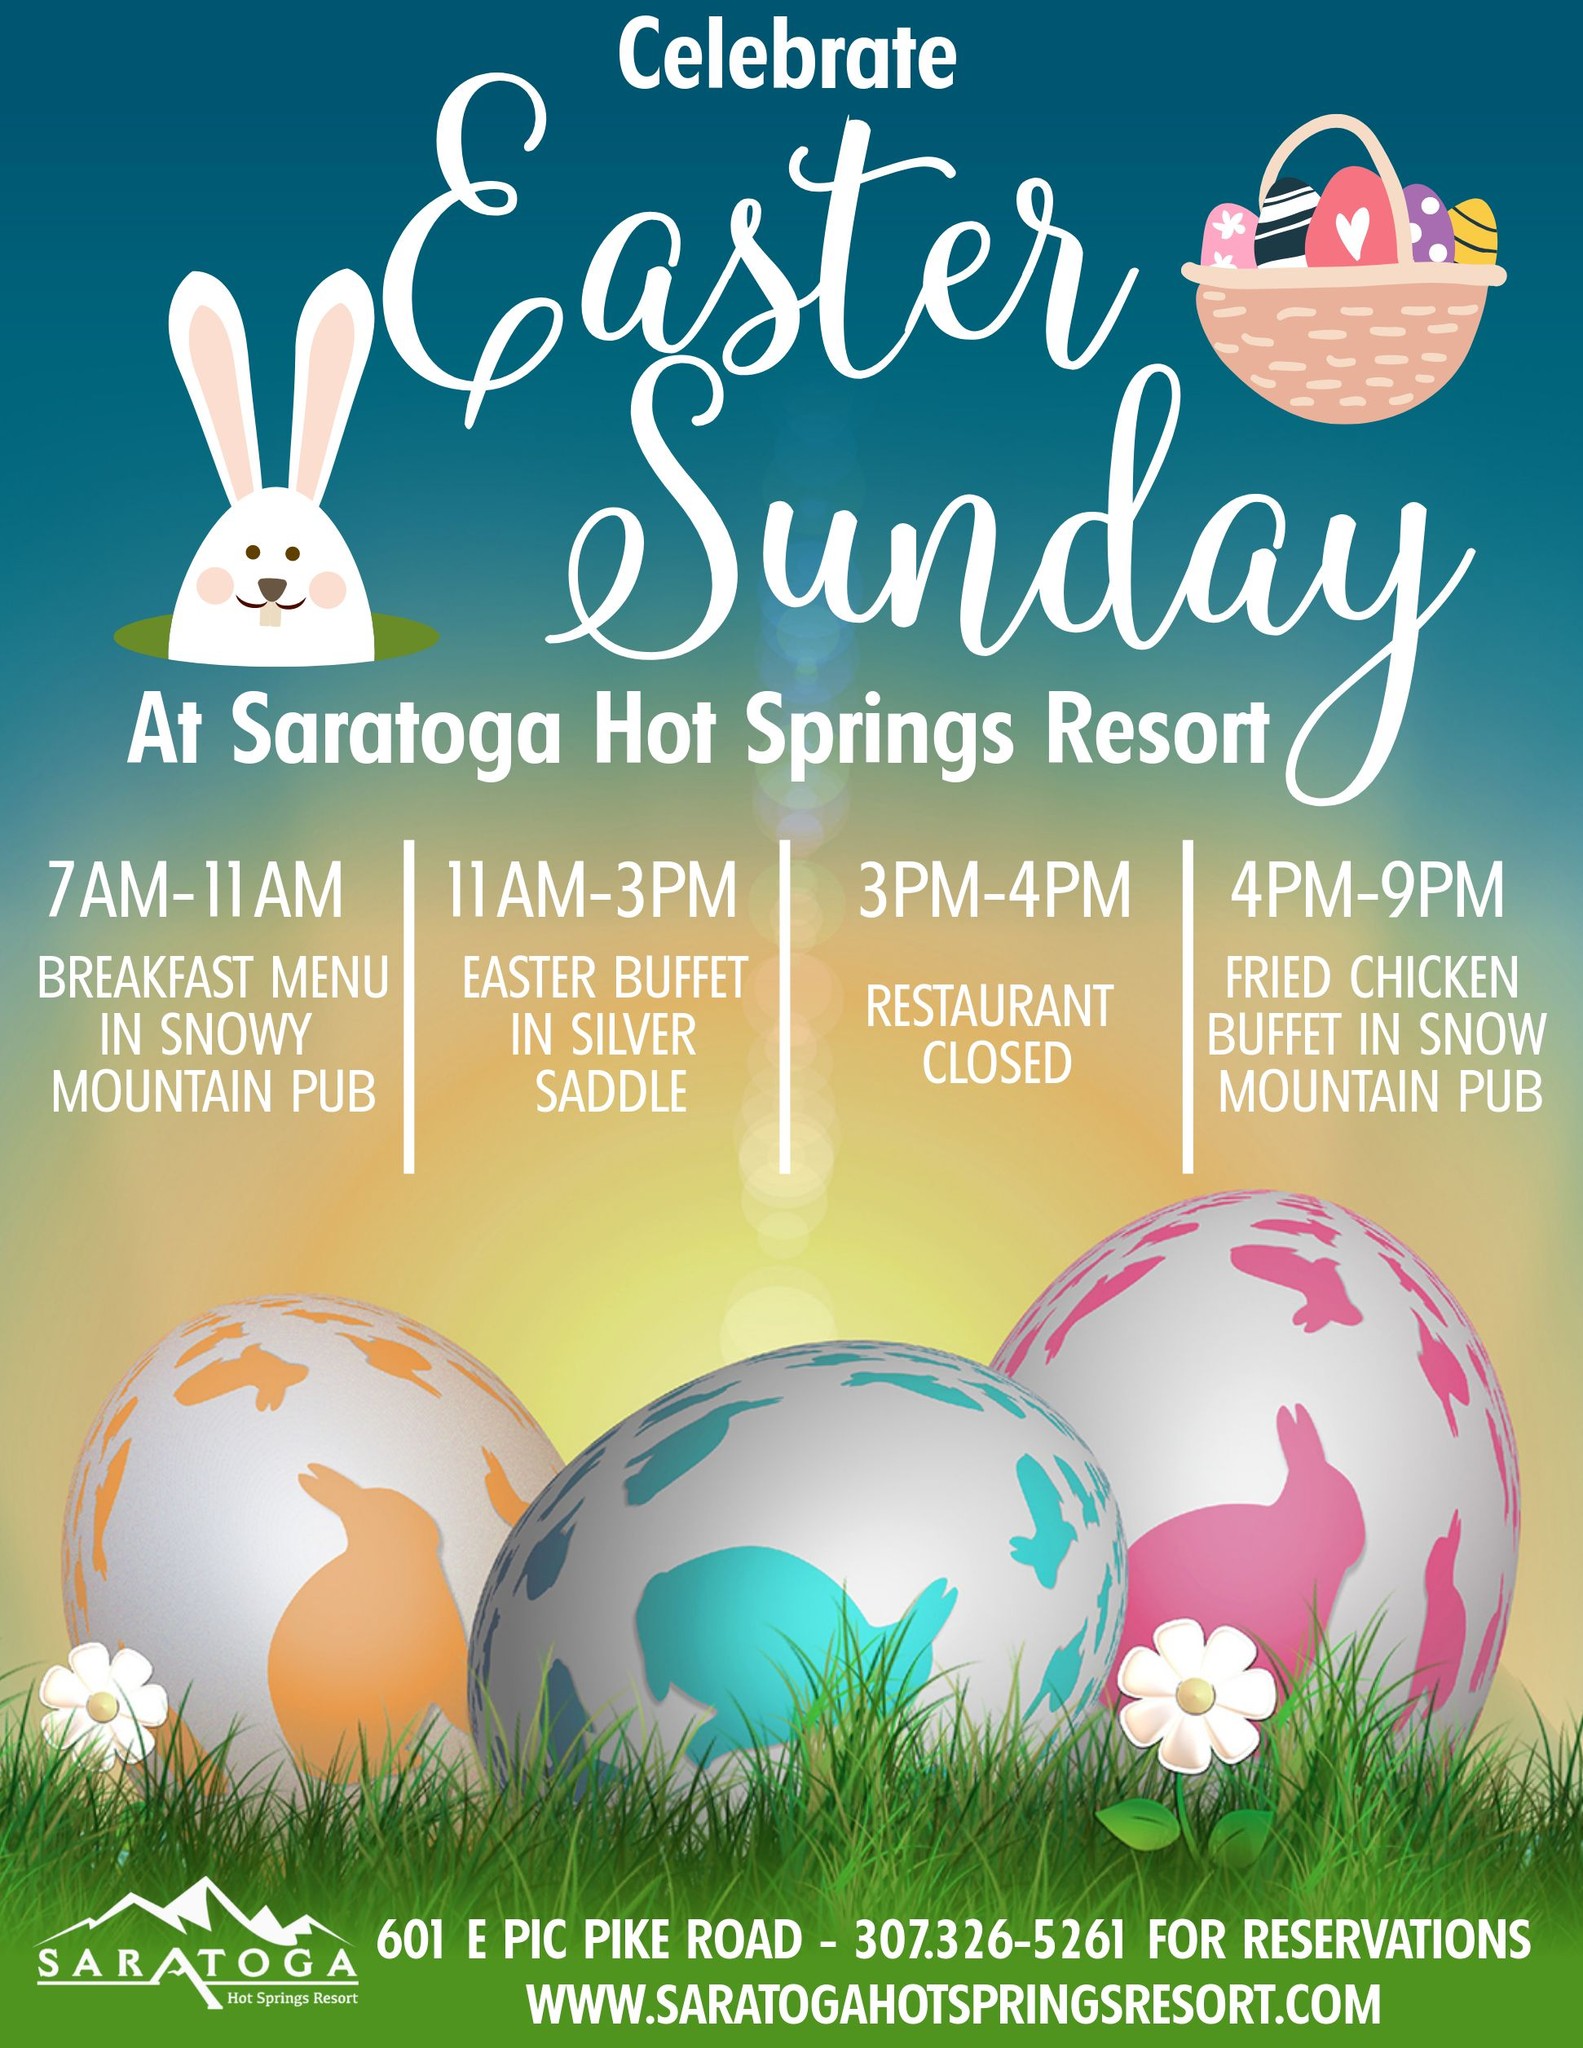 Join Us Easter Weekend For Brunch and Dinner!